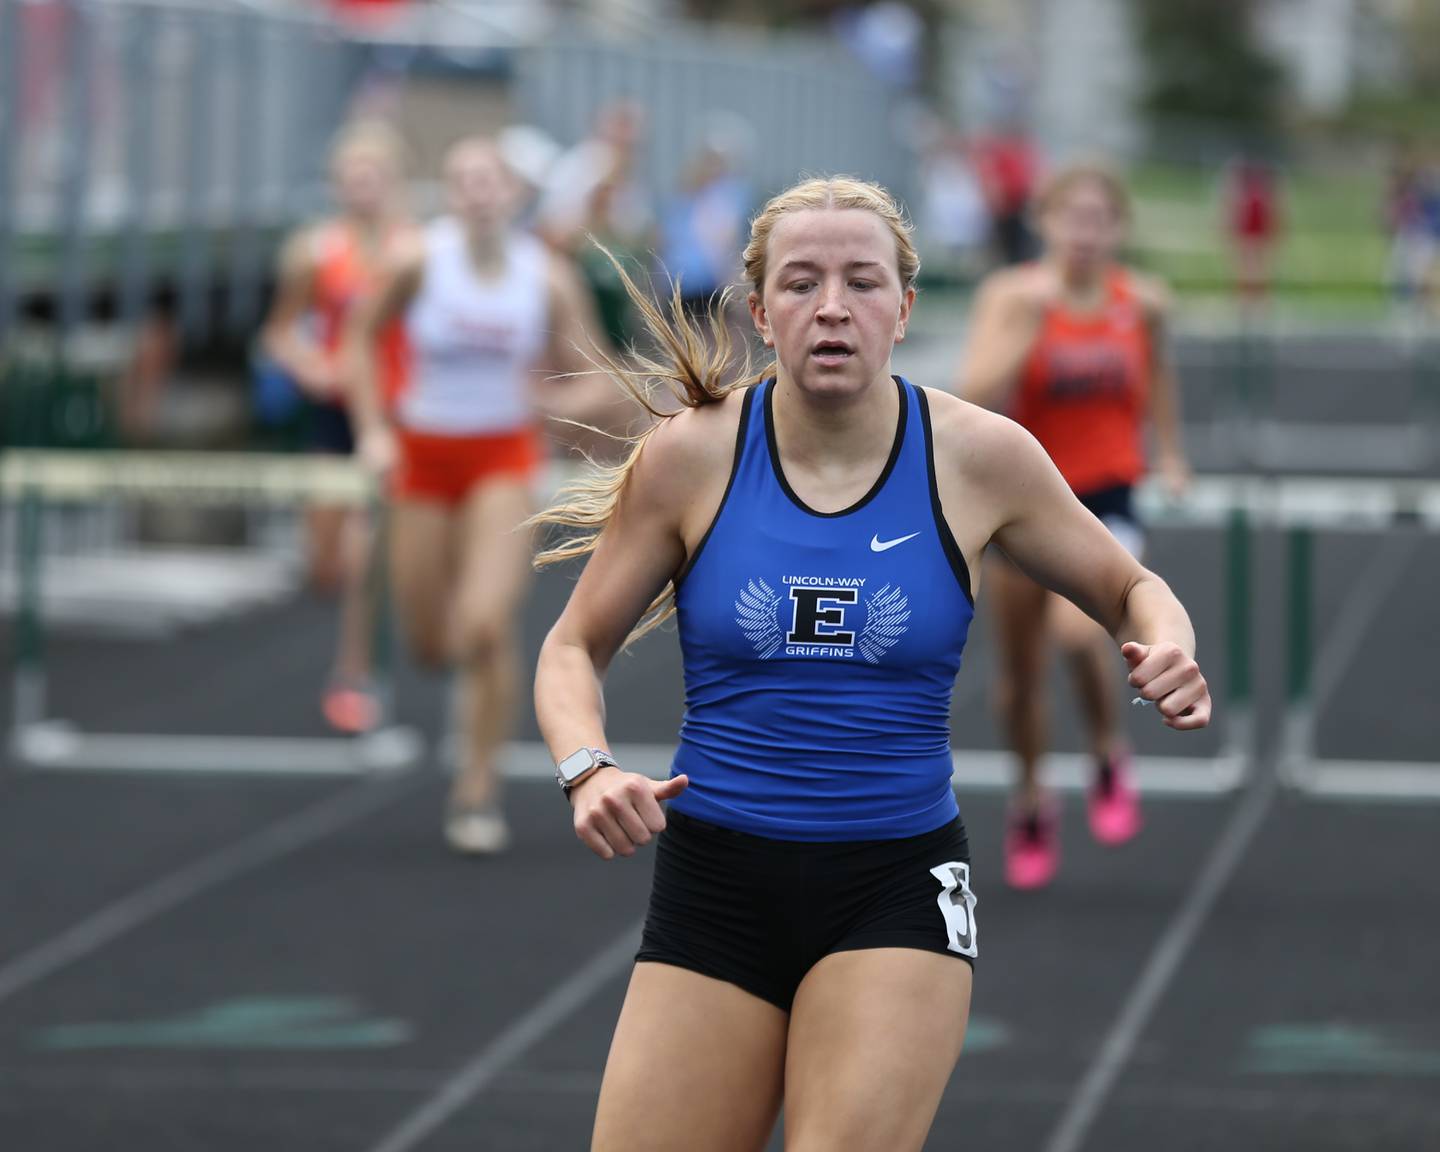 Lincoln-Way East's Sophia Barnard wins in the 100 and 300 hurdles at the Glenbard West's Sue Pariseau Girls Track and Field Invitational.  April 23.2022.